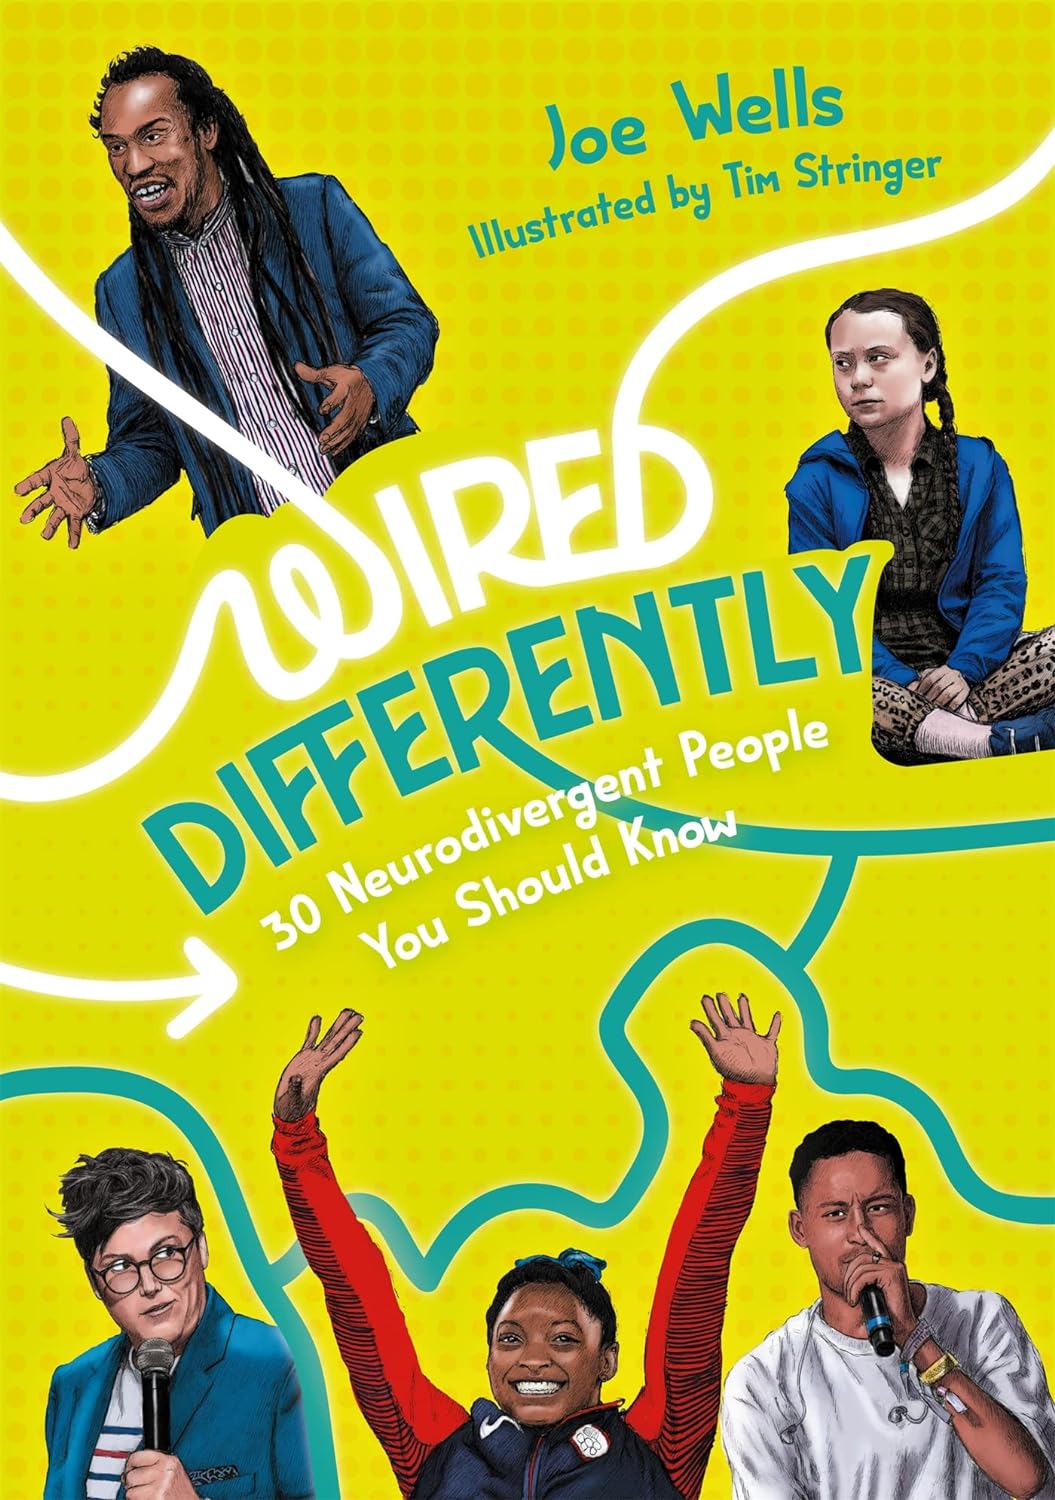 Cover for “Wired Differently: 30 Neurodiverse People Who You Should”